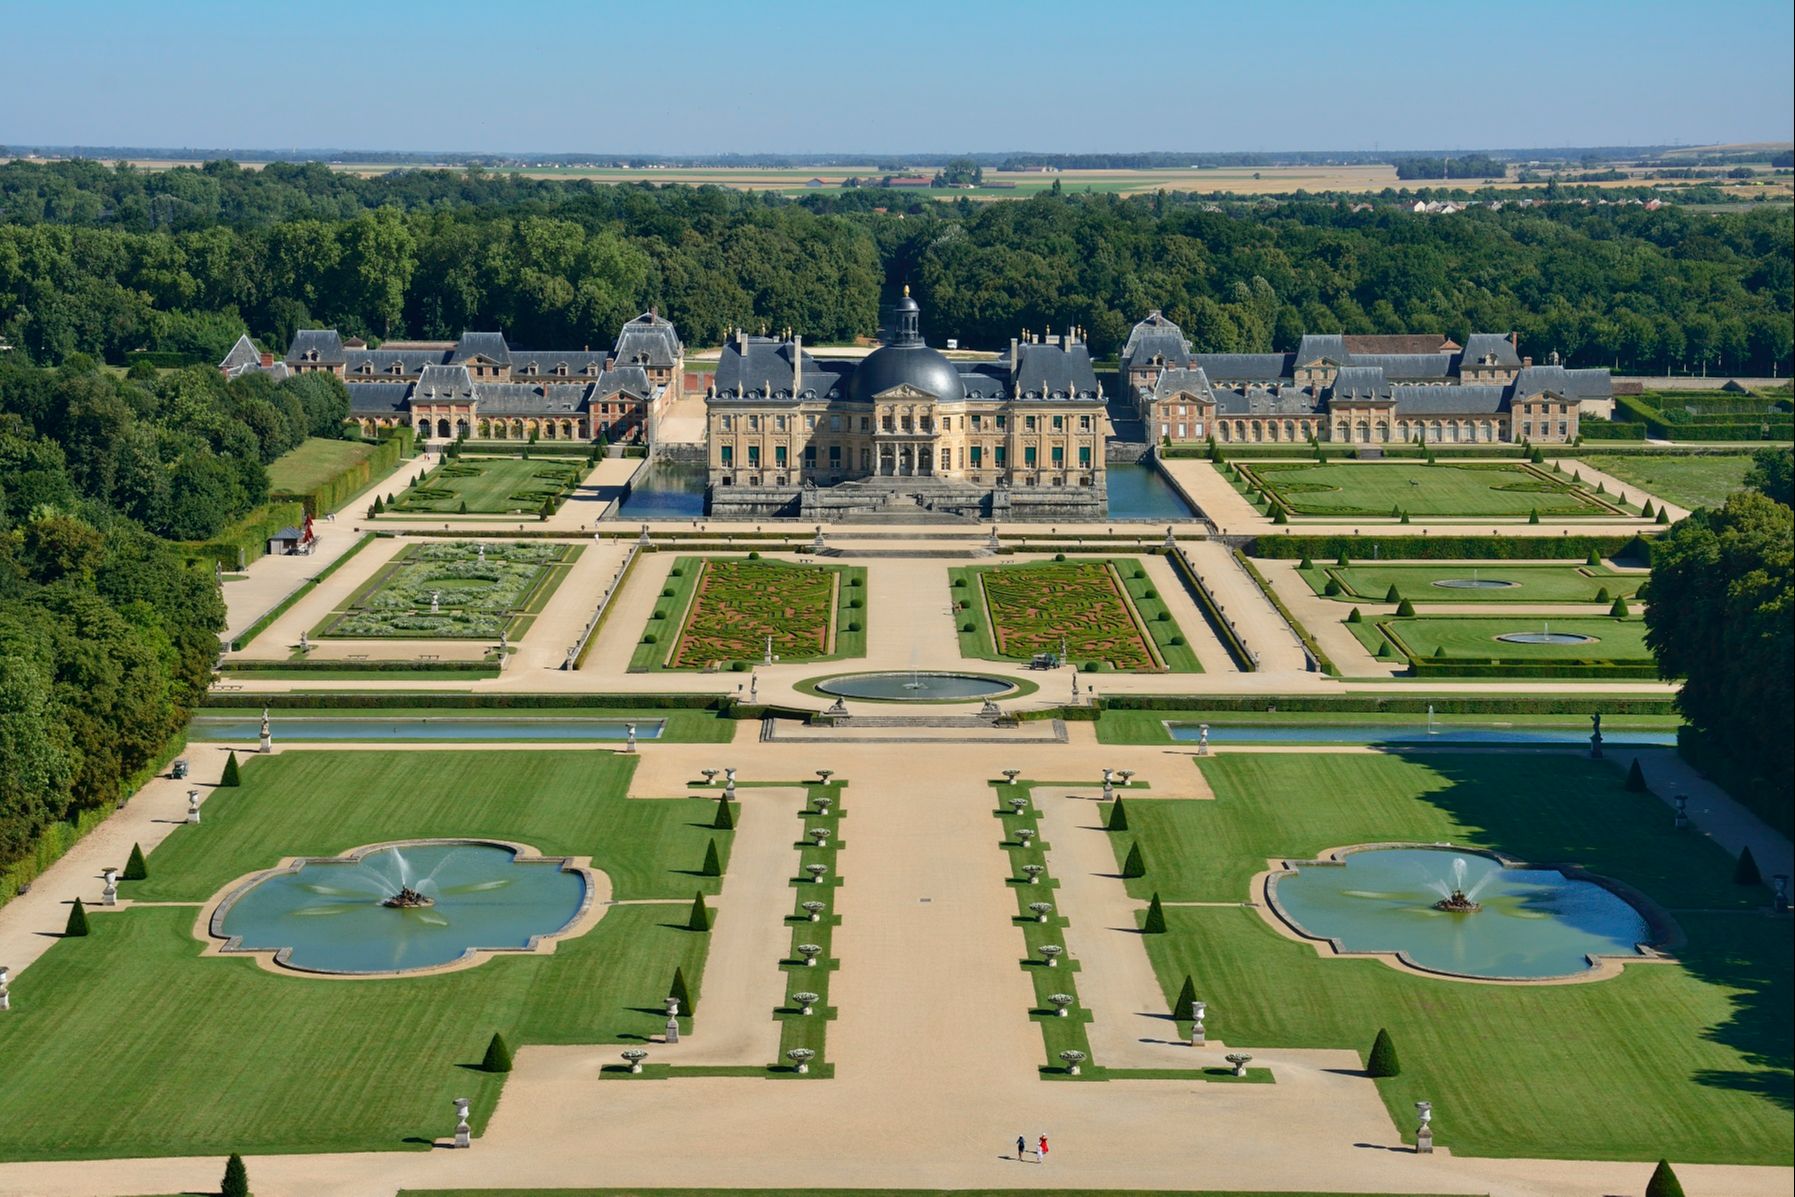 All day trip audio tour of Fontainebleau and Vaux le Vicomte, with transport from Paris